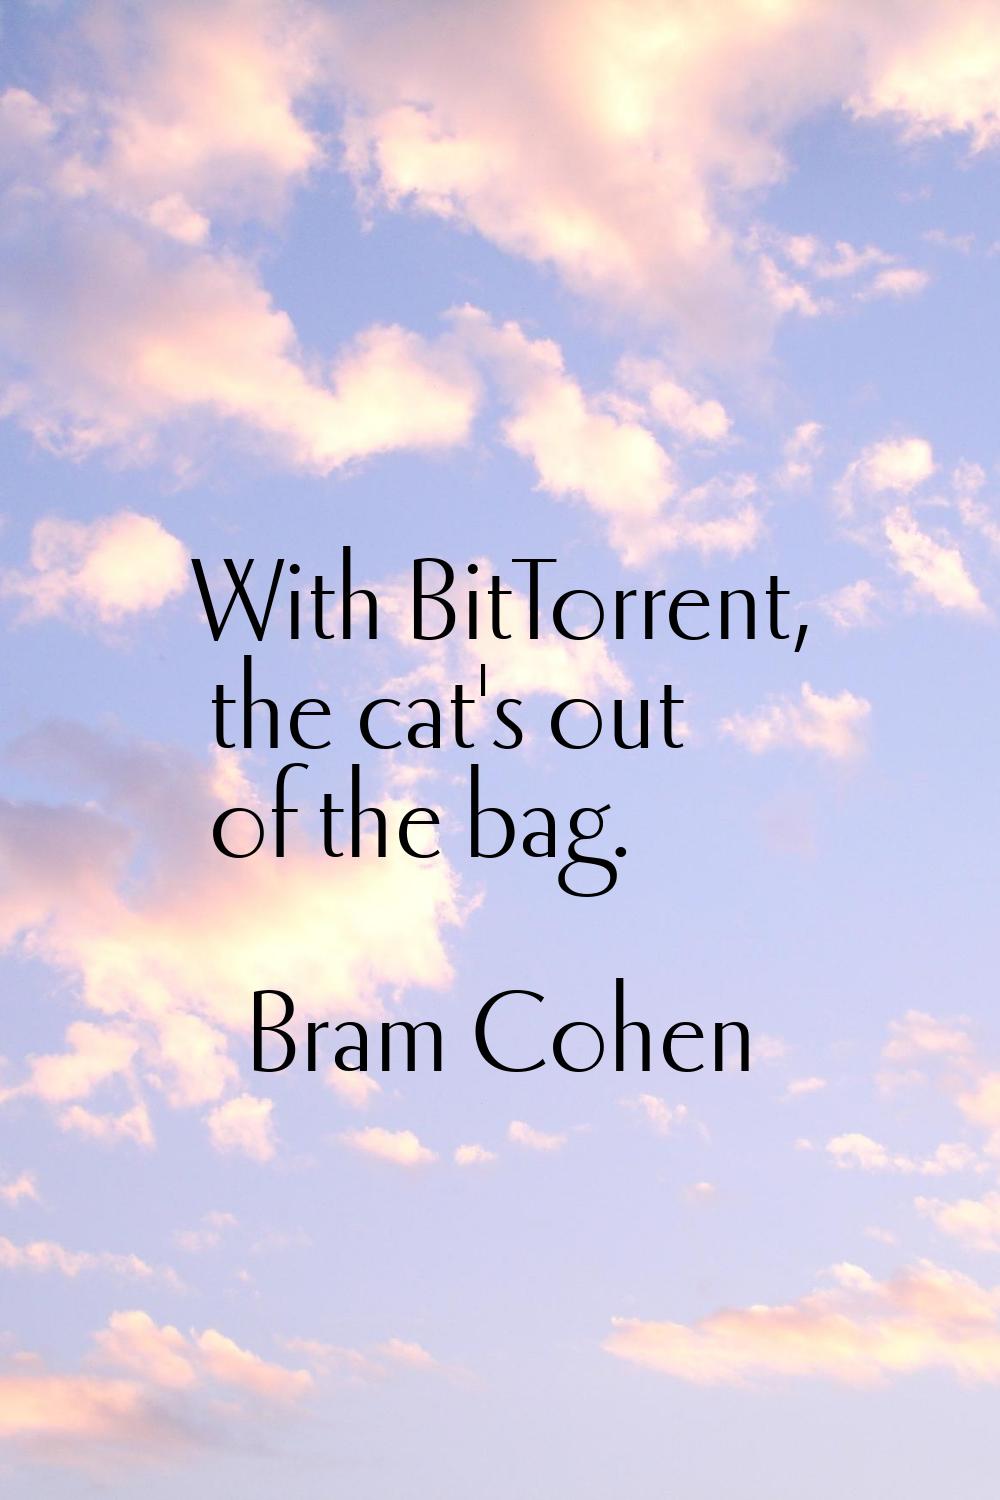 With BitTorrent, the cat's out of the bag.